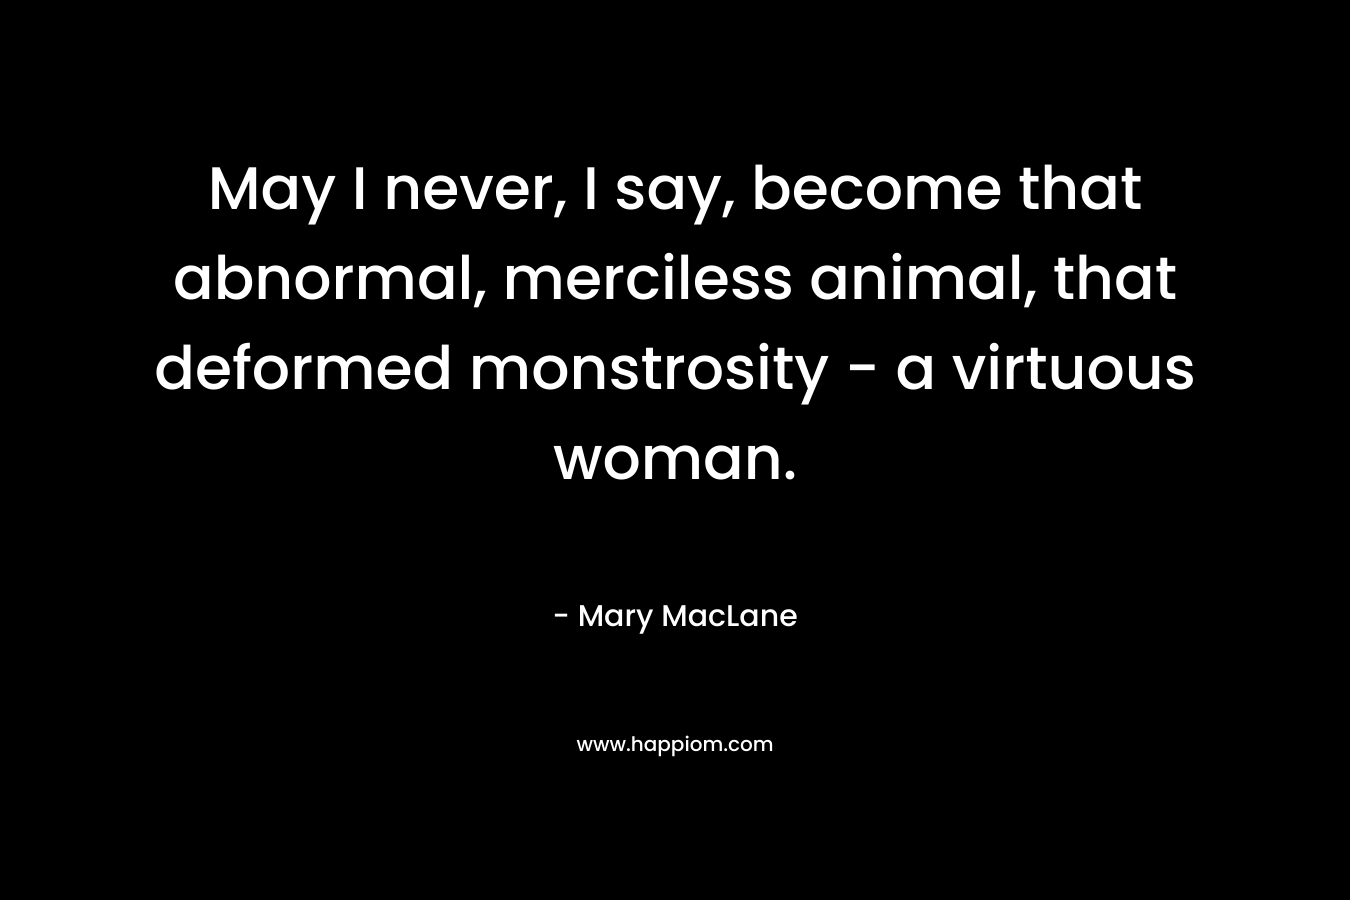 May I never, I say, become that abnormal, merciless animal, that deformed monstrosity - a virtuous woman.